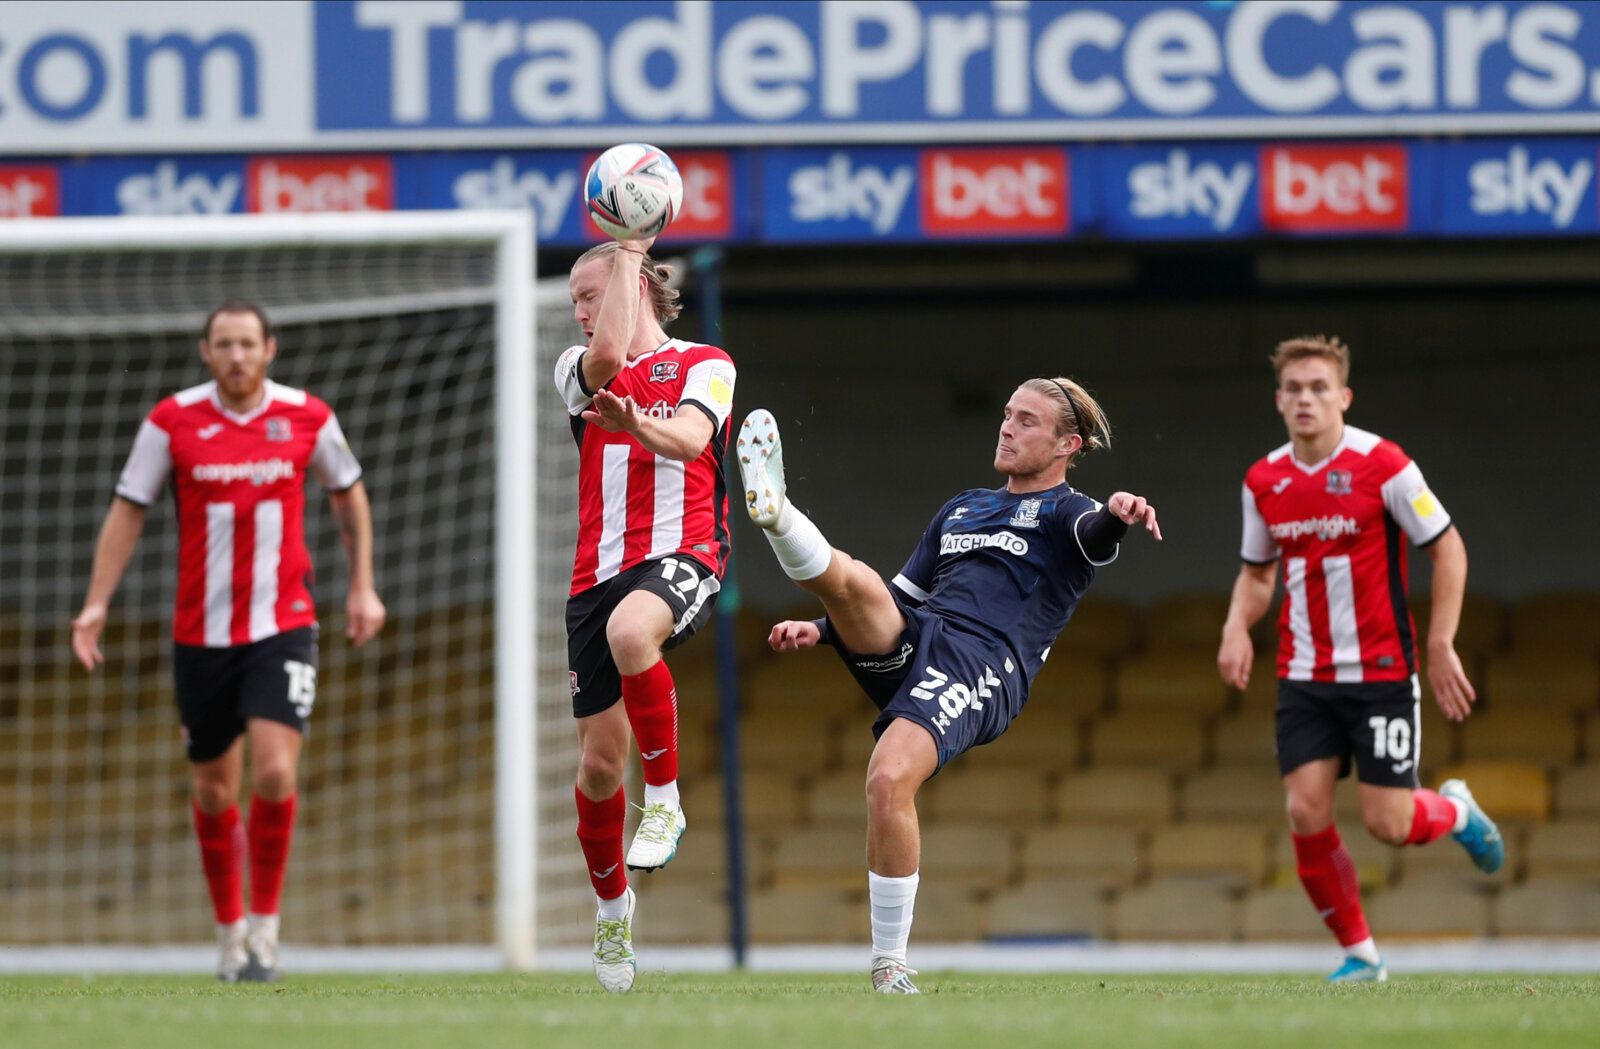 Soccer Football - League Two - Southend United v Exeter City - Roots Hall, Southend-on-Sea, Britain - October 10, 2020   Southend United’s Kyle Taylor in action with Exeter City’s Matt Jay   Action Images/Matthew Childs    EDITORIAL USE ONLY. No use with unauthorized audio, video, data, fixture lists, club/league logos or 